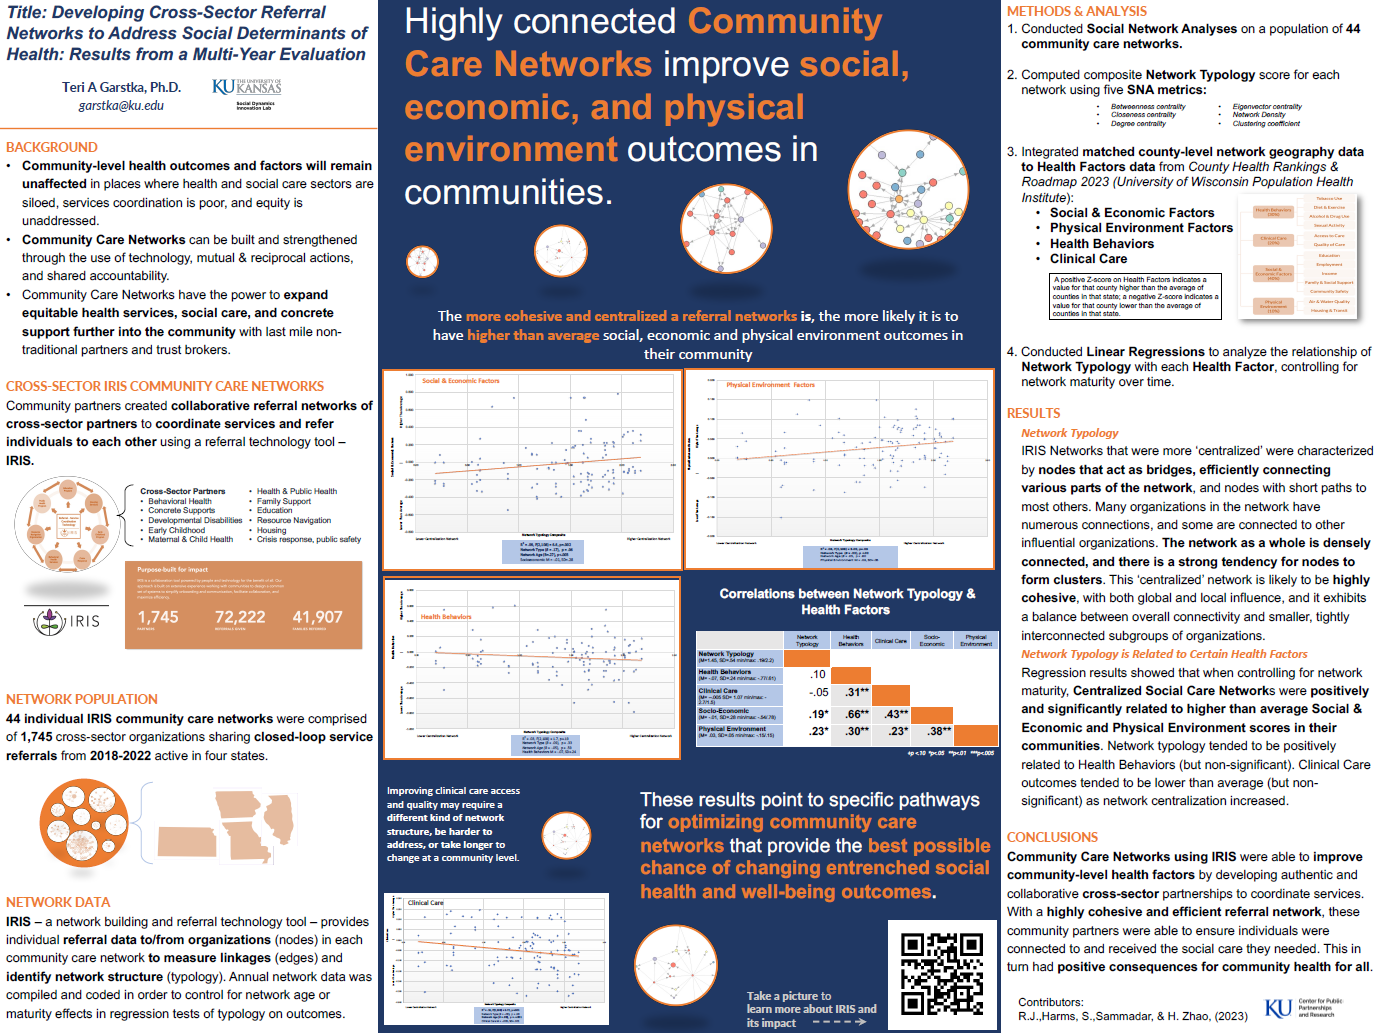 Poster of APHA presentation with text and graphics